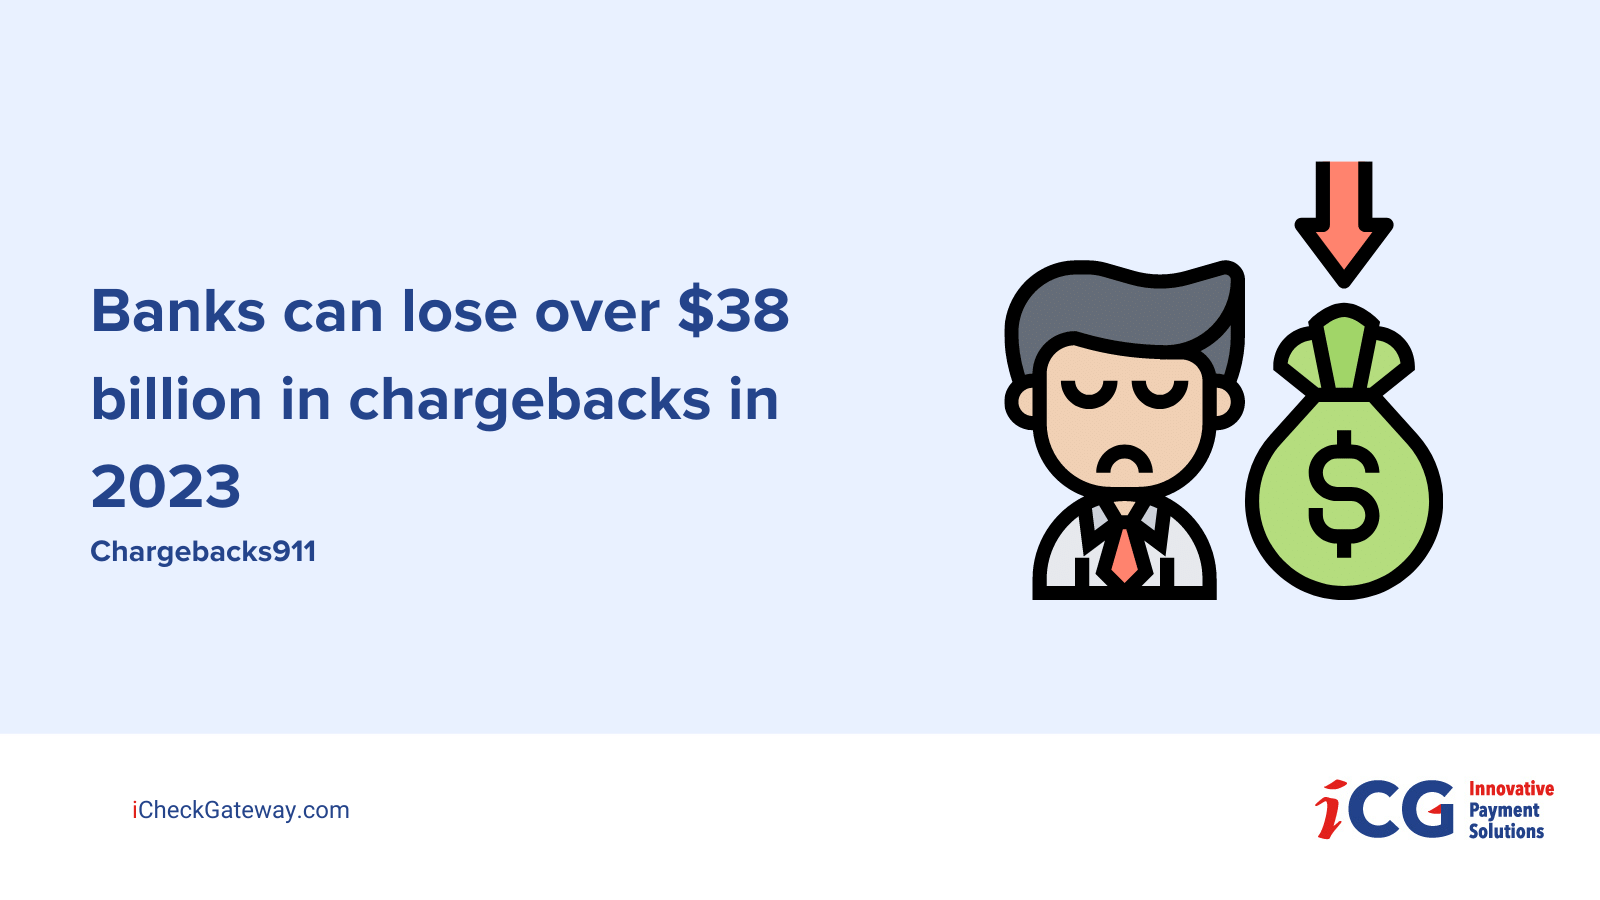 Banks can lose over $38 billion in chargebacks in 2023